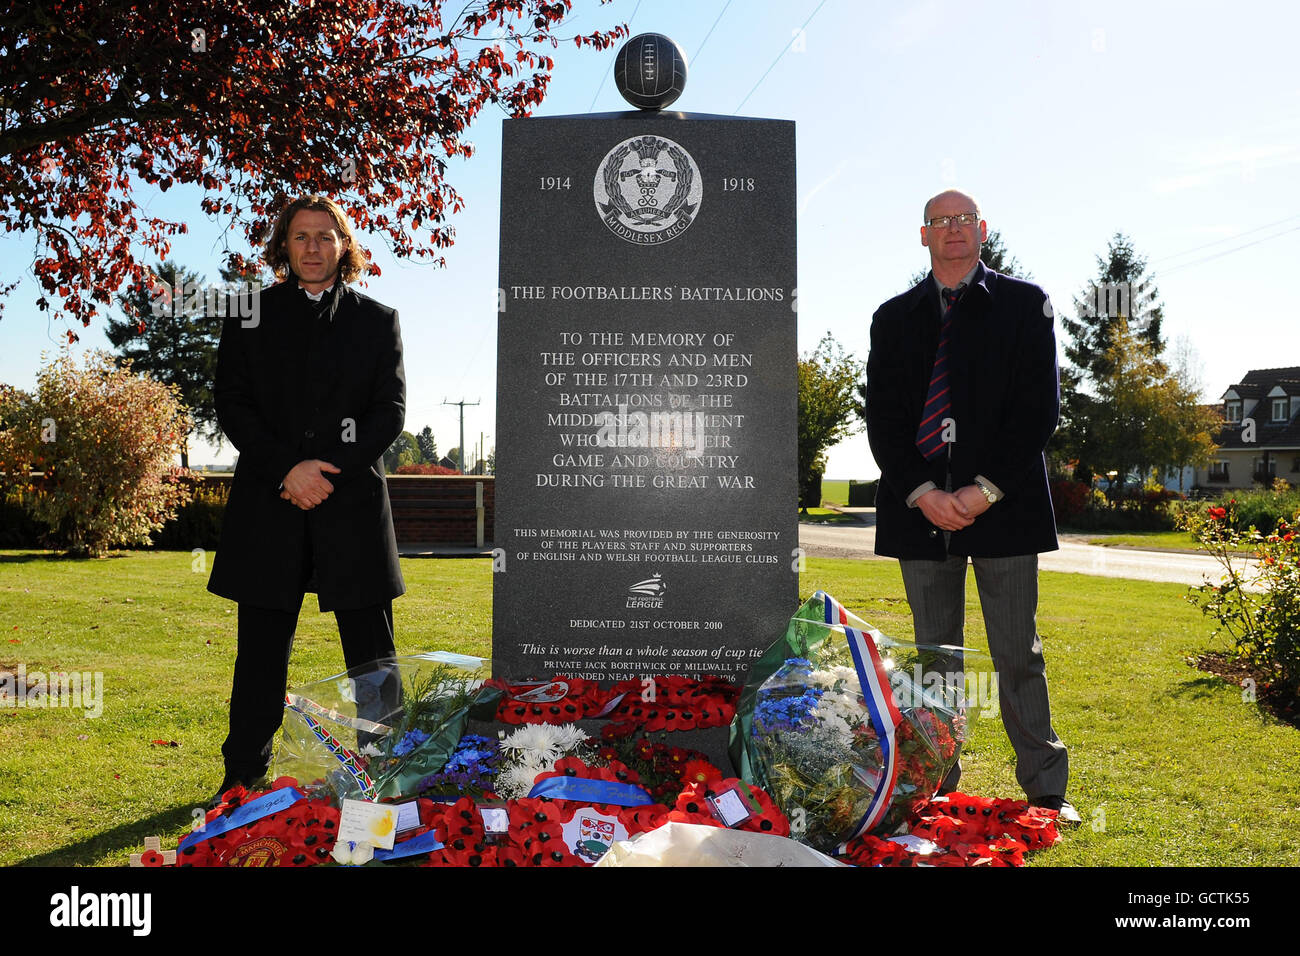 Wycombe Wanderers' Gareth Ainsworth and organiser of the Footballers' Battalions Memorial Phil Stant during the Football Battalion Memorial unveiling in Longueval, France. Stock Photo